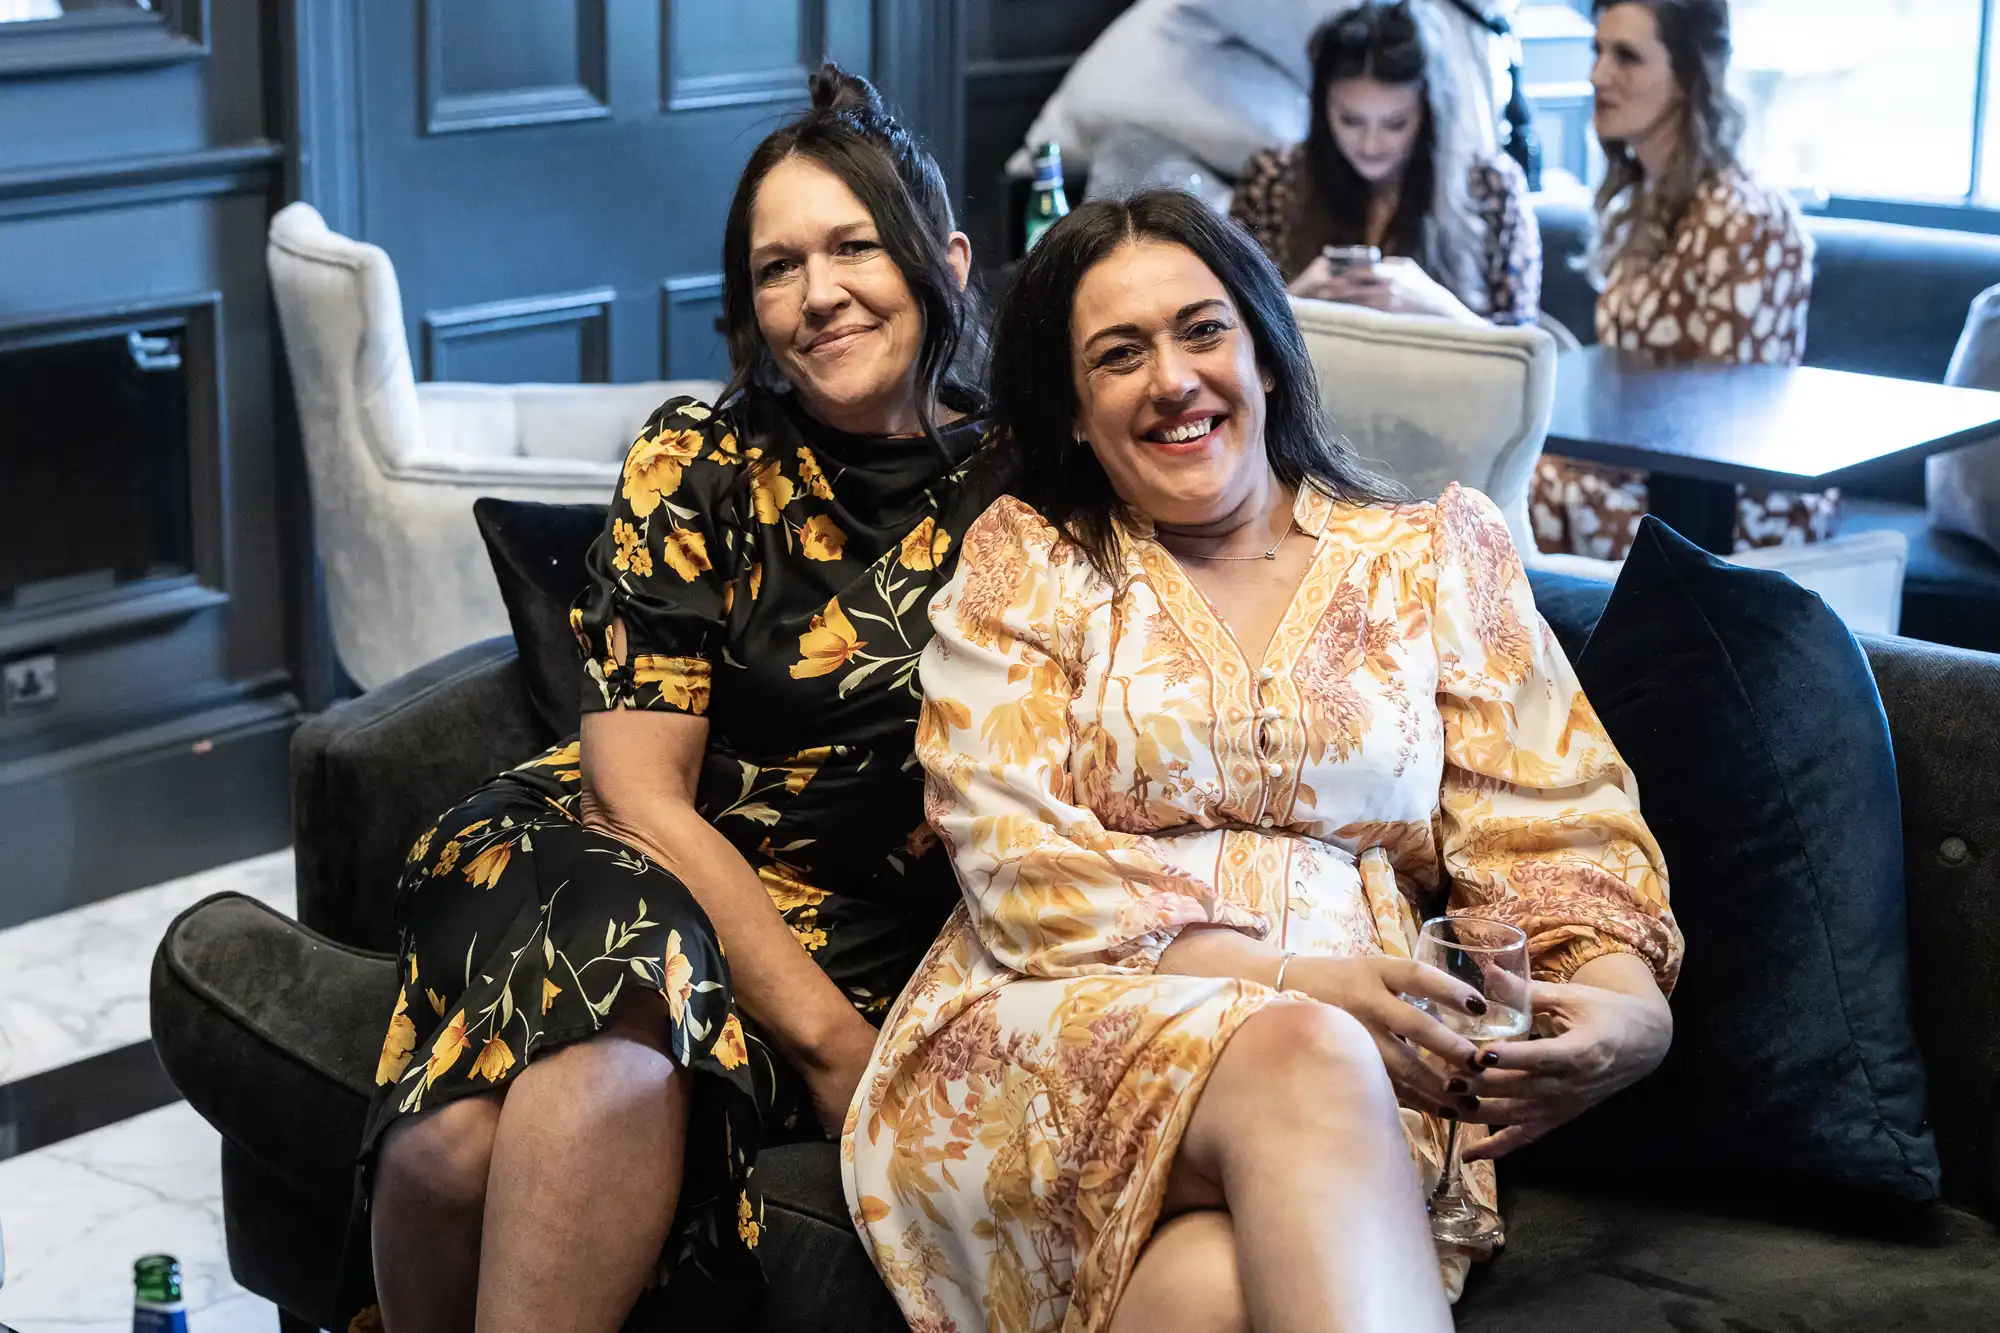 Two women seated on a black couch in a room with dark walls, smiling at the camera. Both are wearing floral-patterned dresses; one has a drink in hand. Others in the background are seated at tables.